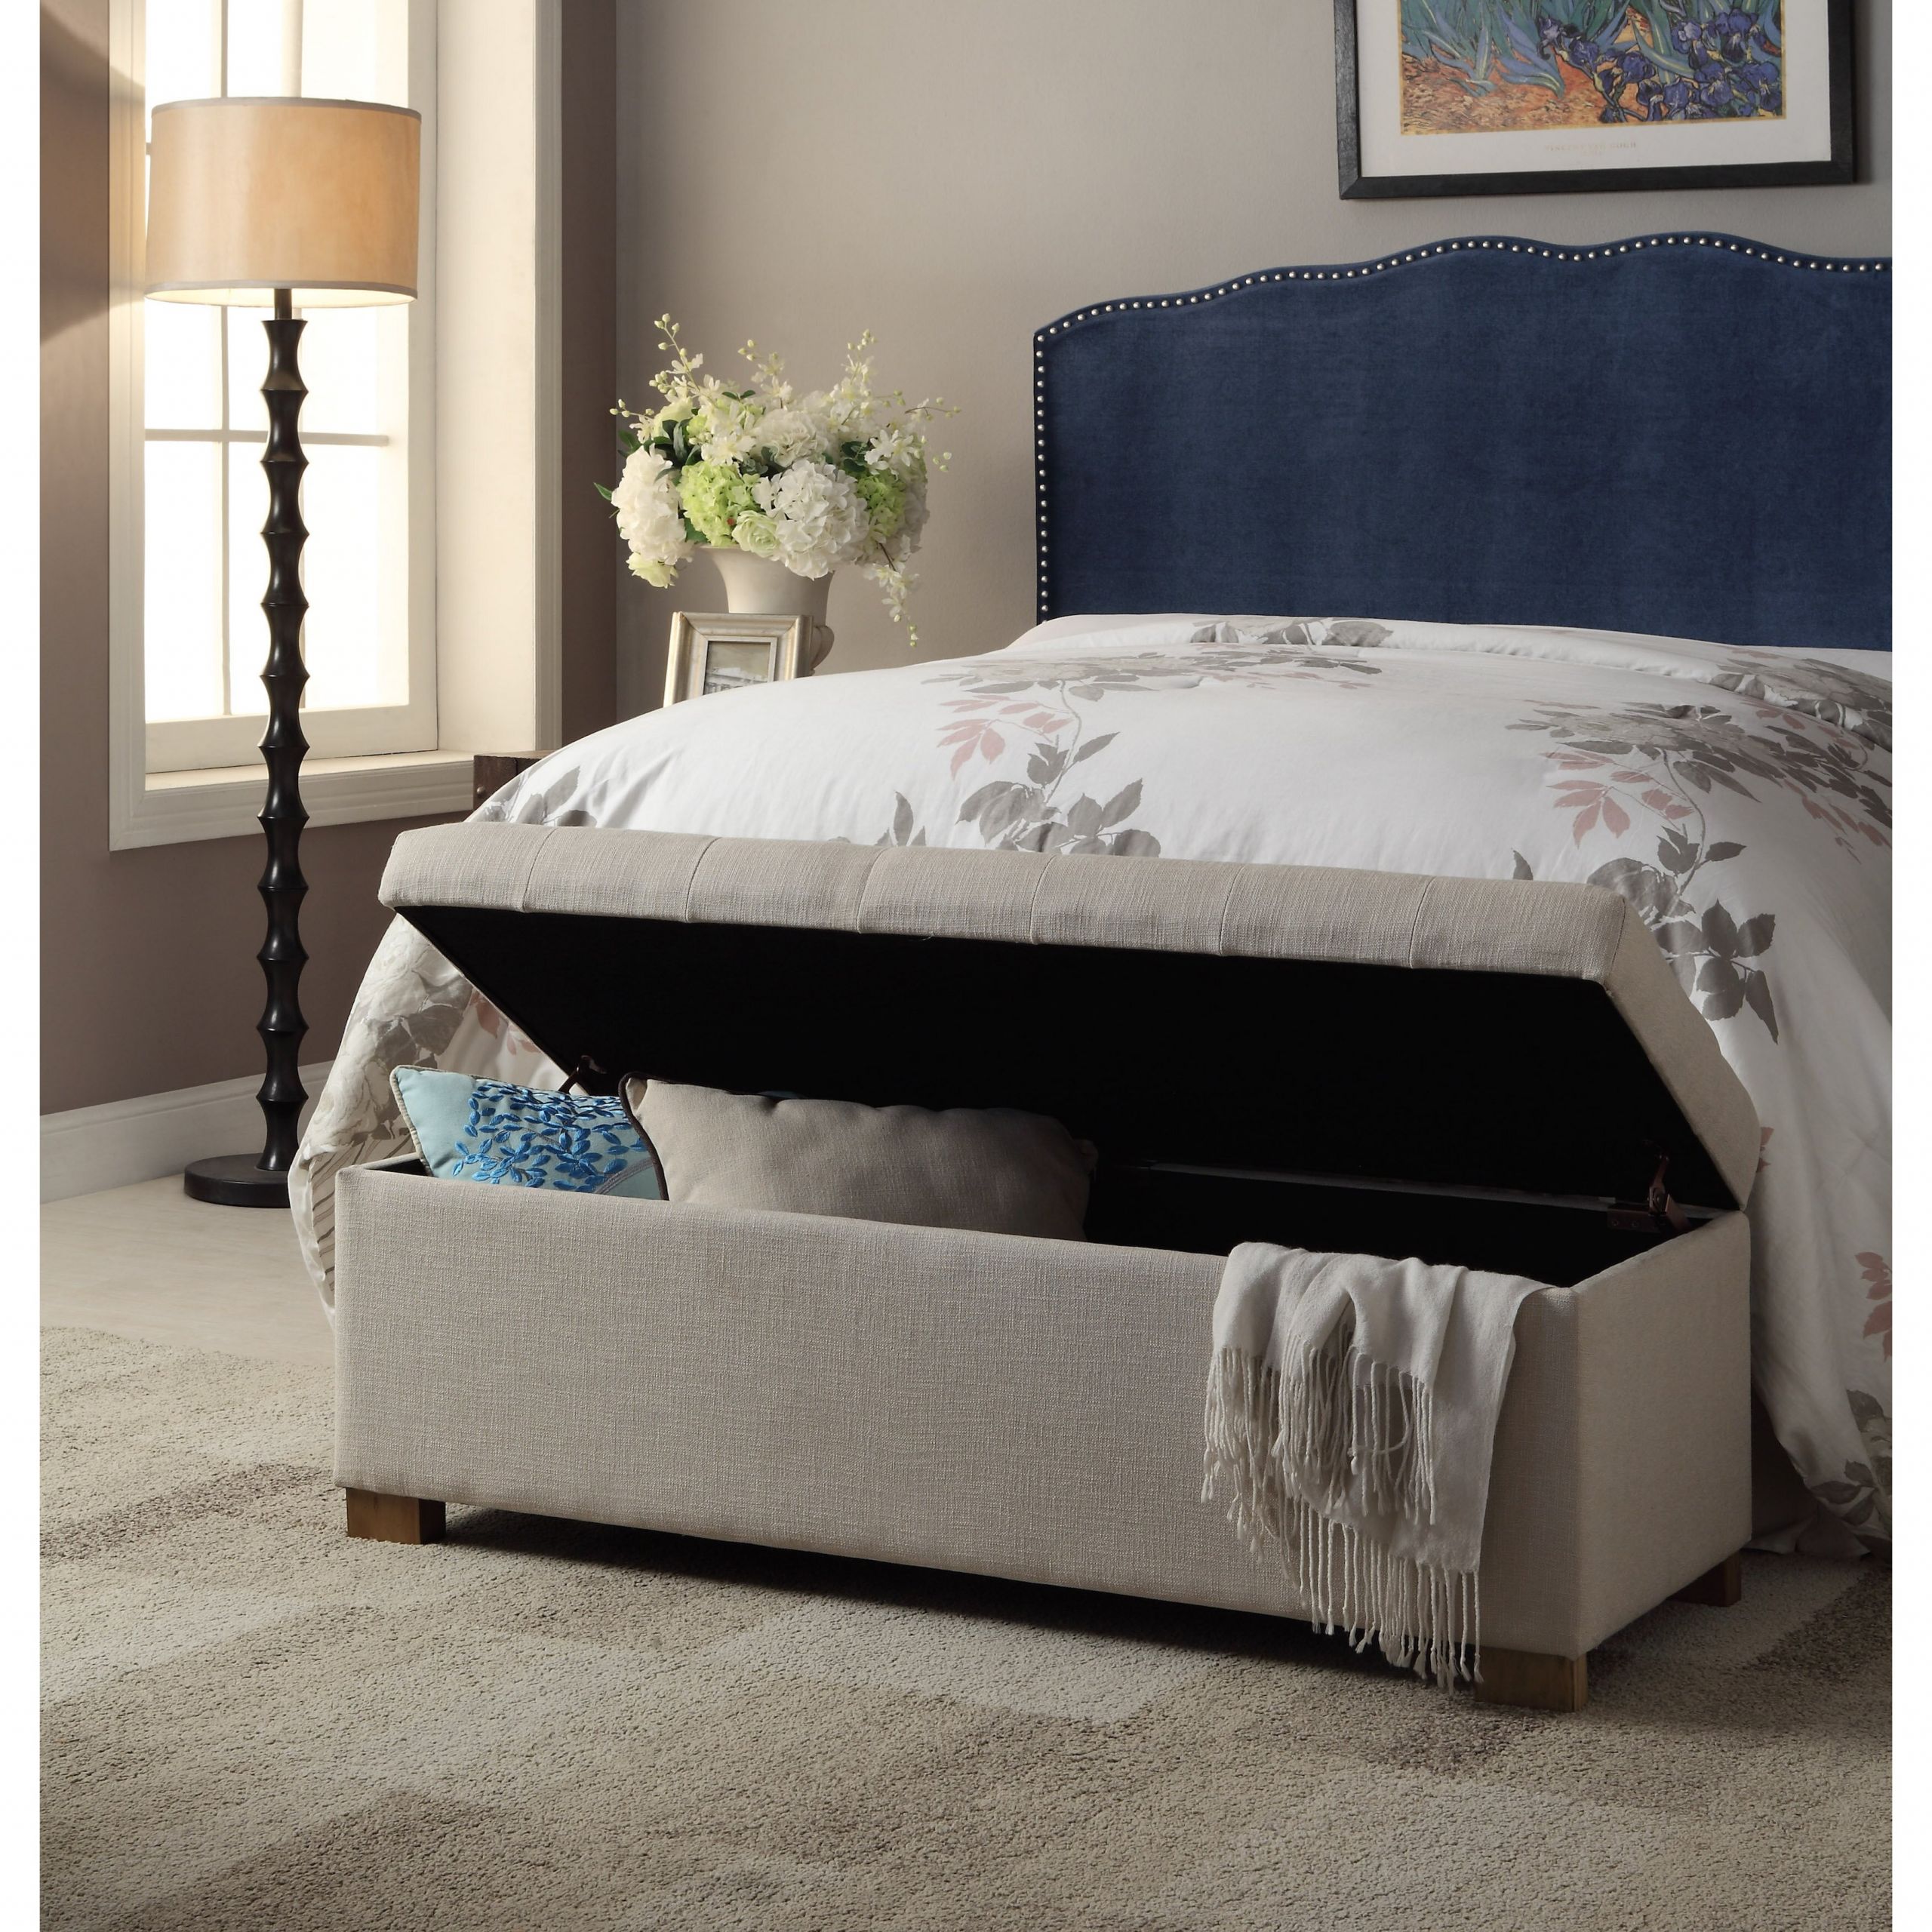 Large Storage Bench For Bedroom
 Andover Mills Ravenwood Wood Storage Bedroom Bench